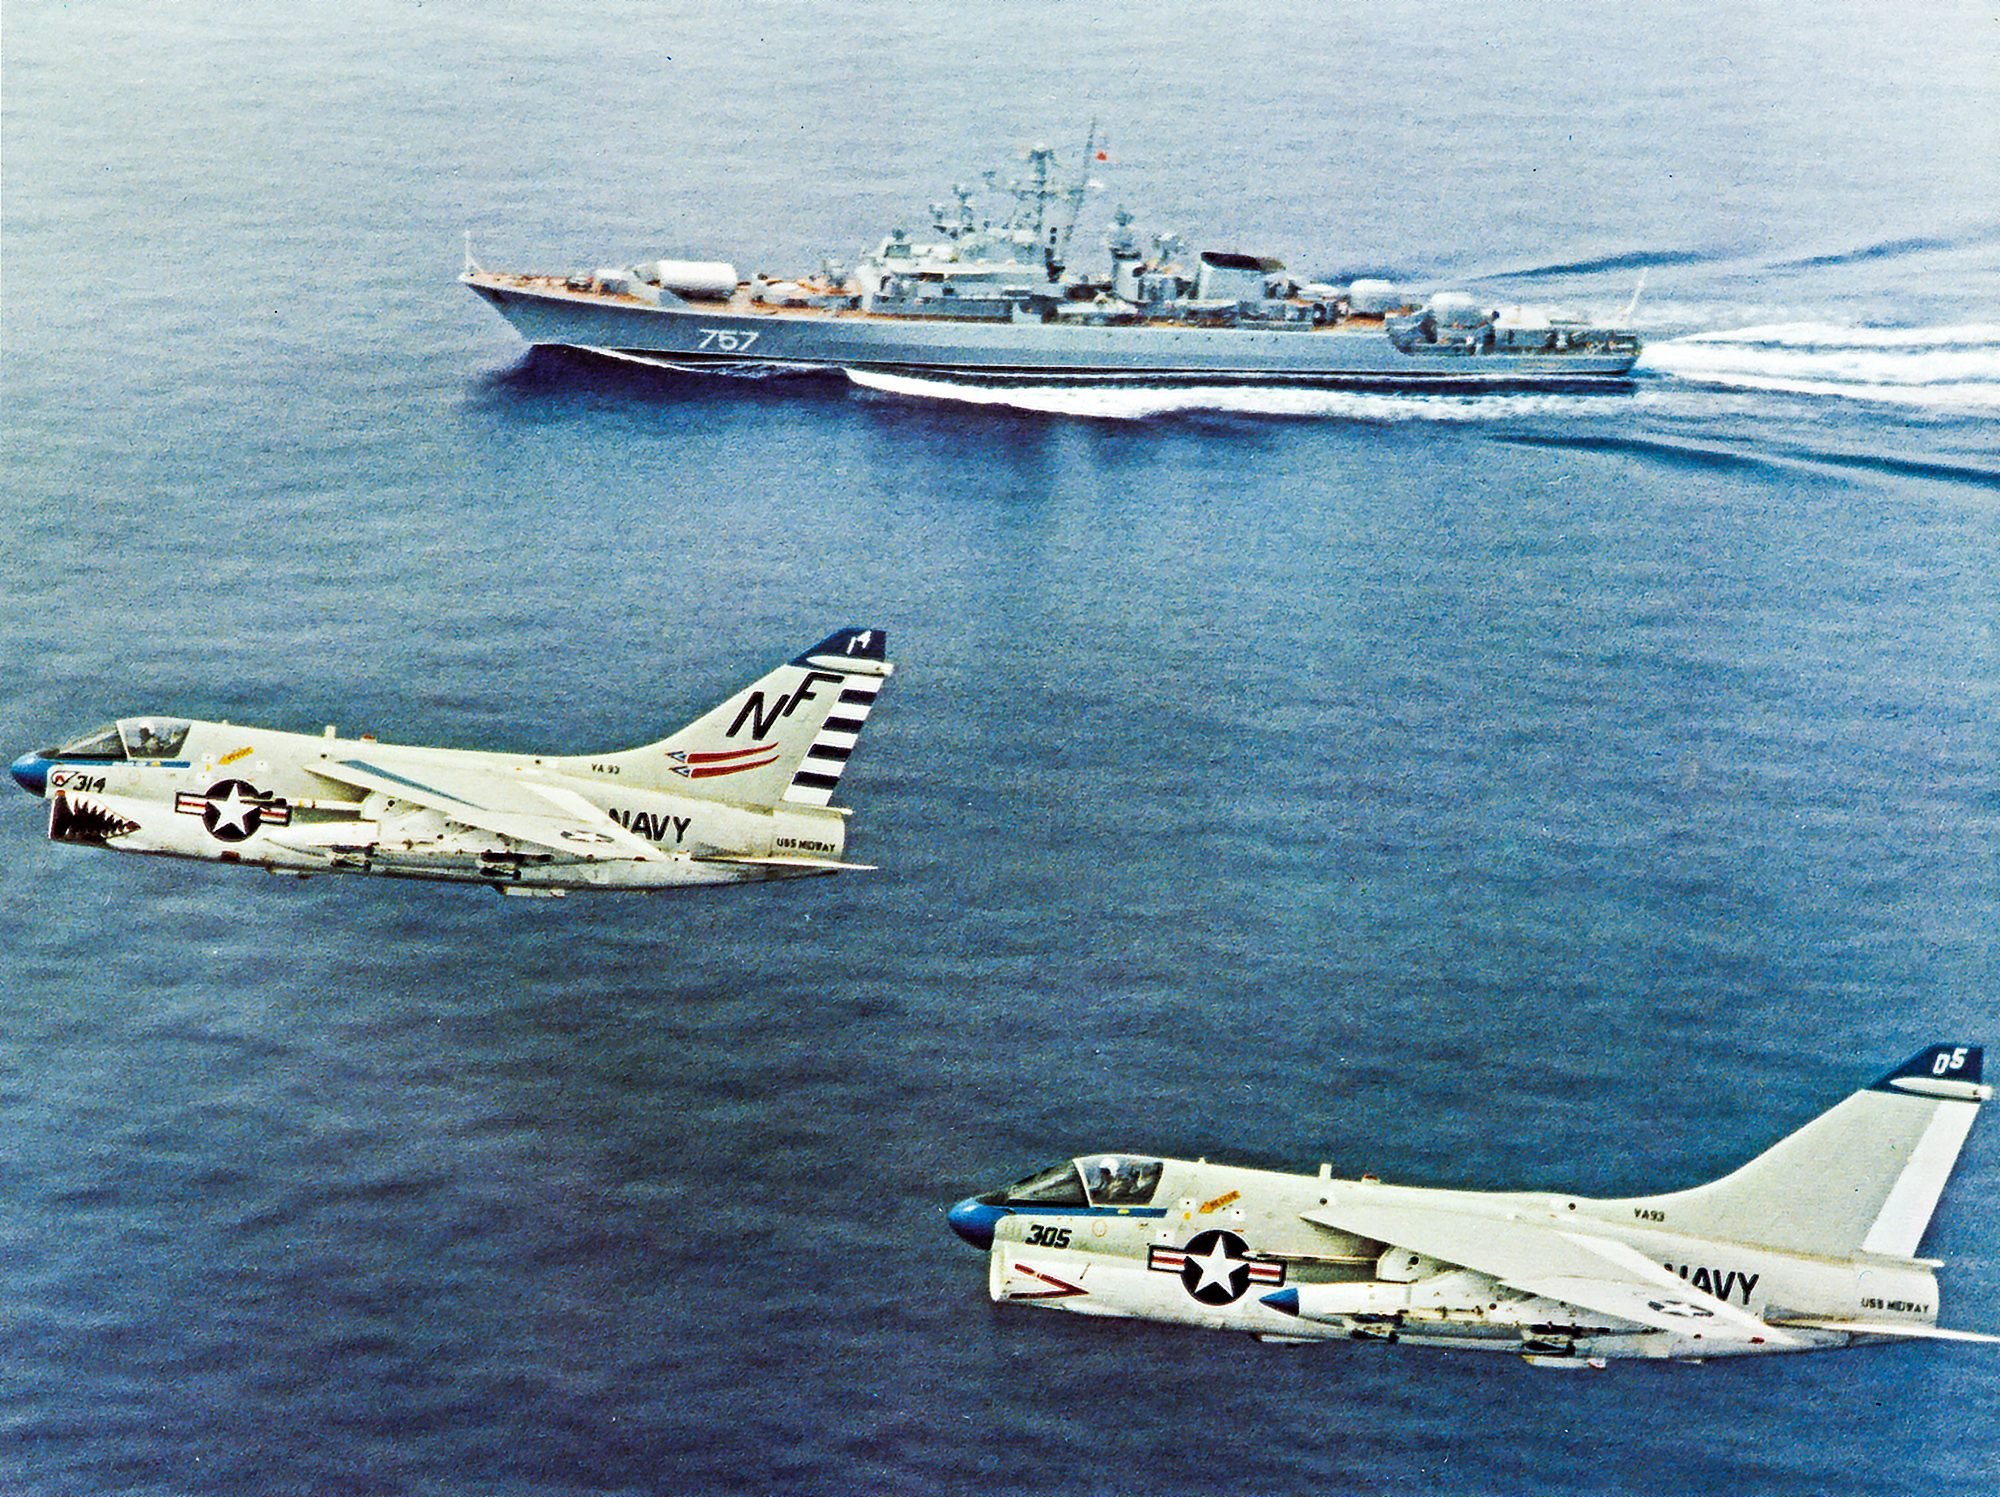 From USS Midway CV-41 1979 Cruise Book edit.jpg